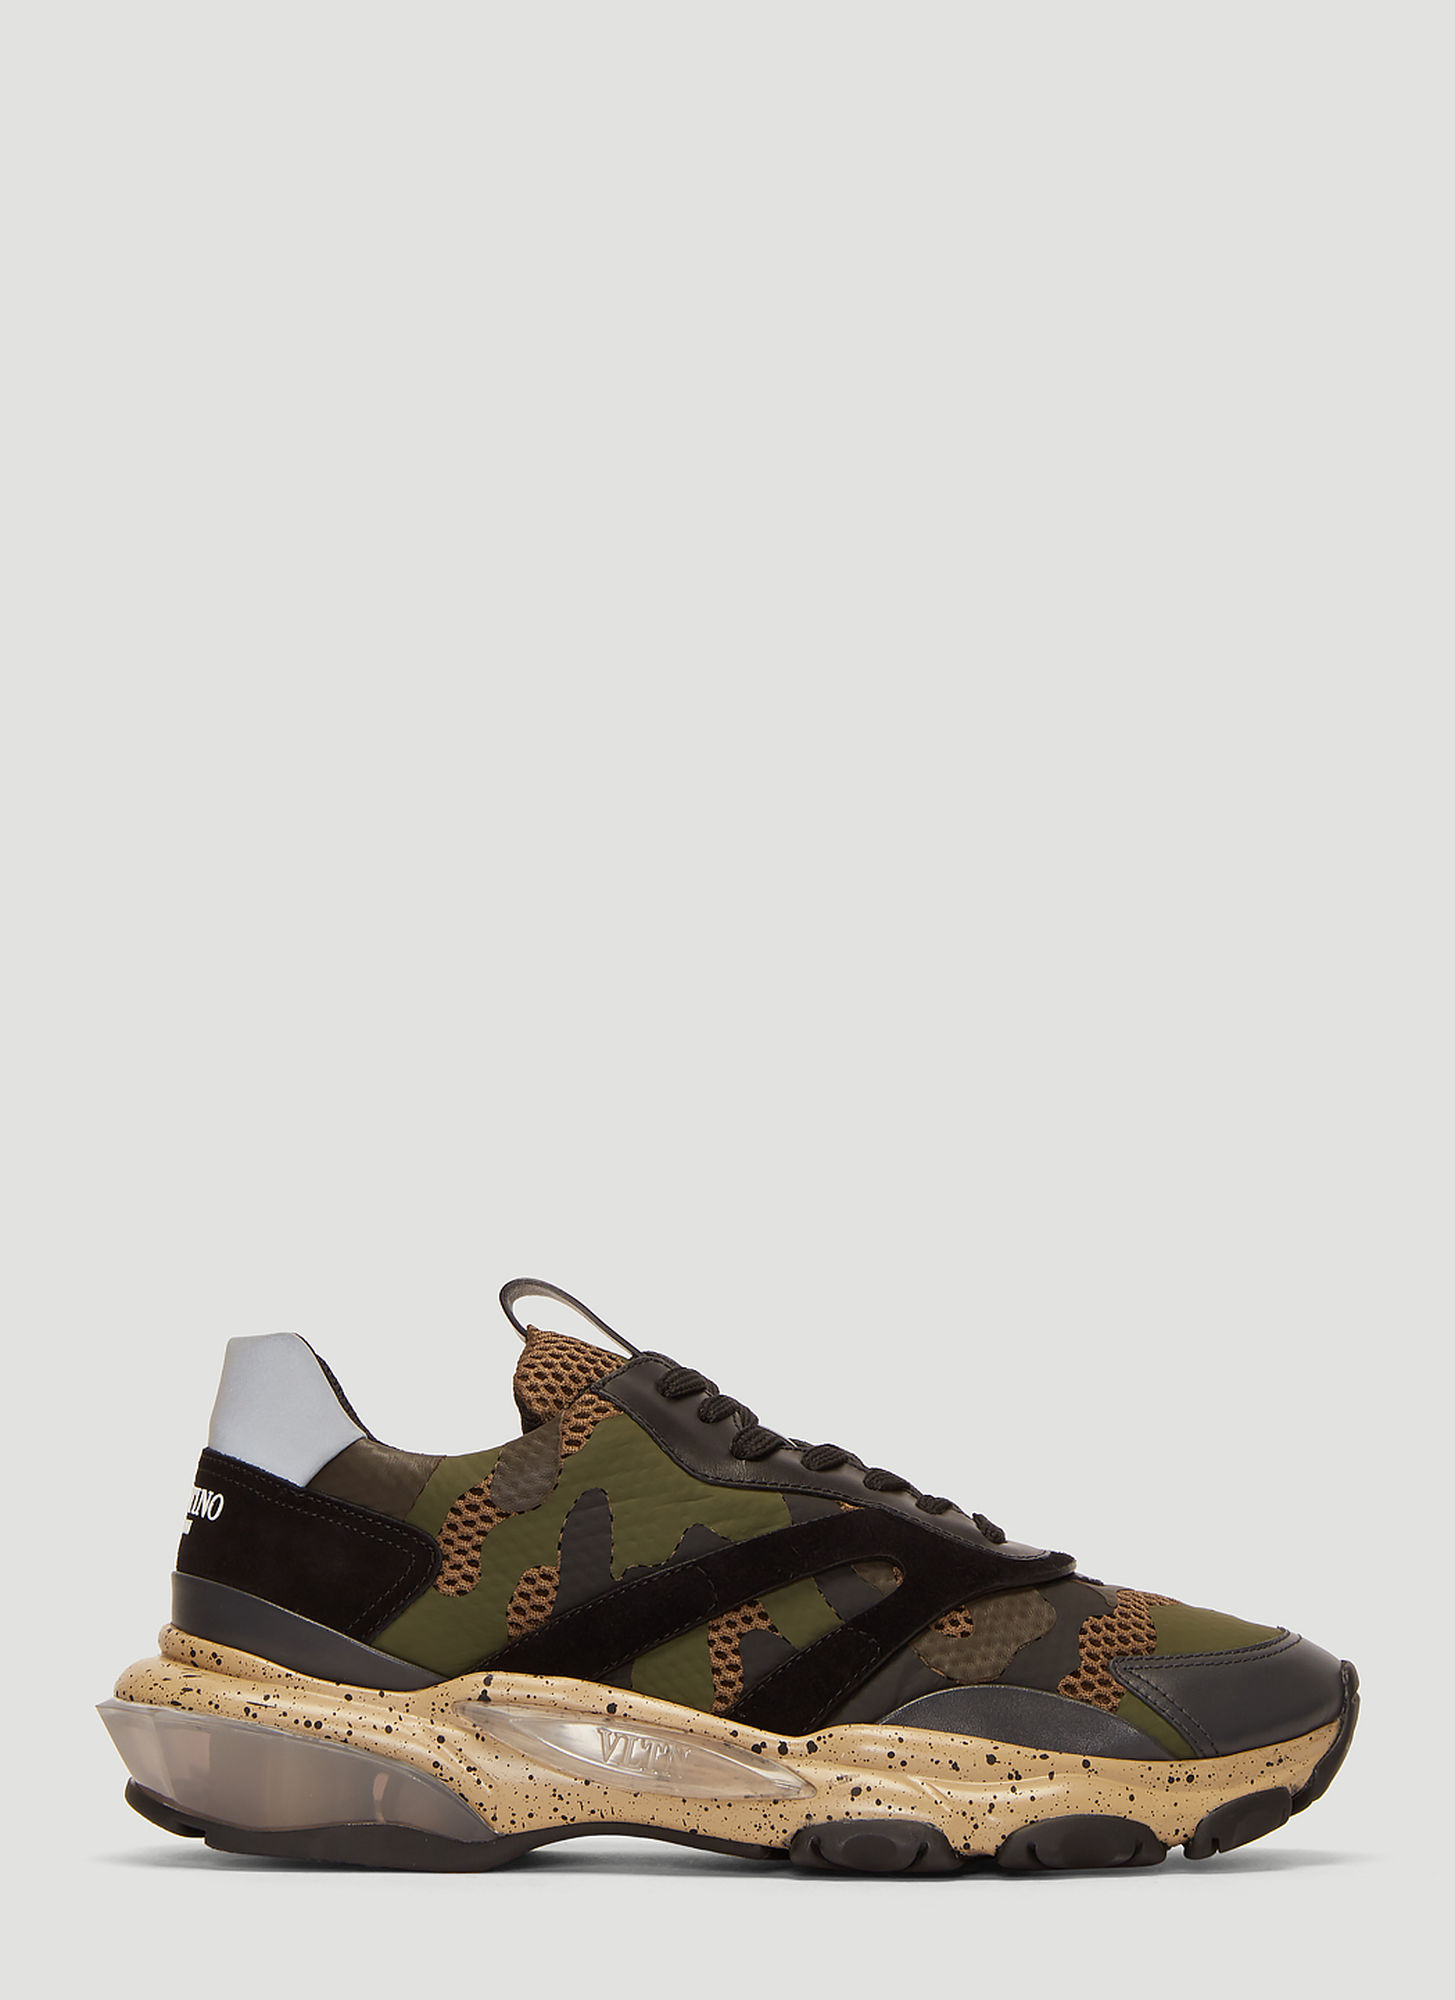 Valentino Camouflage Bounce Sneakers in Khaki size EU – 43 | The ...